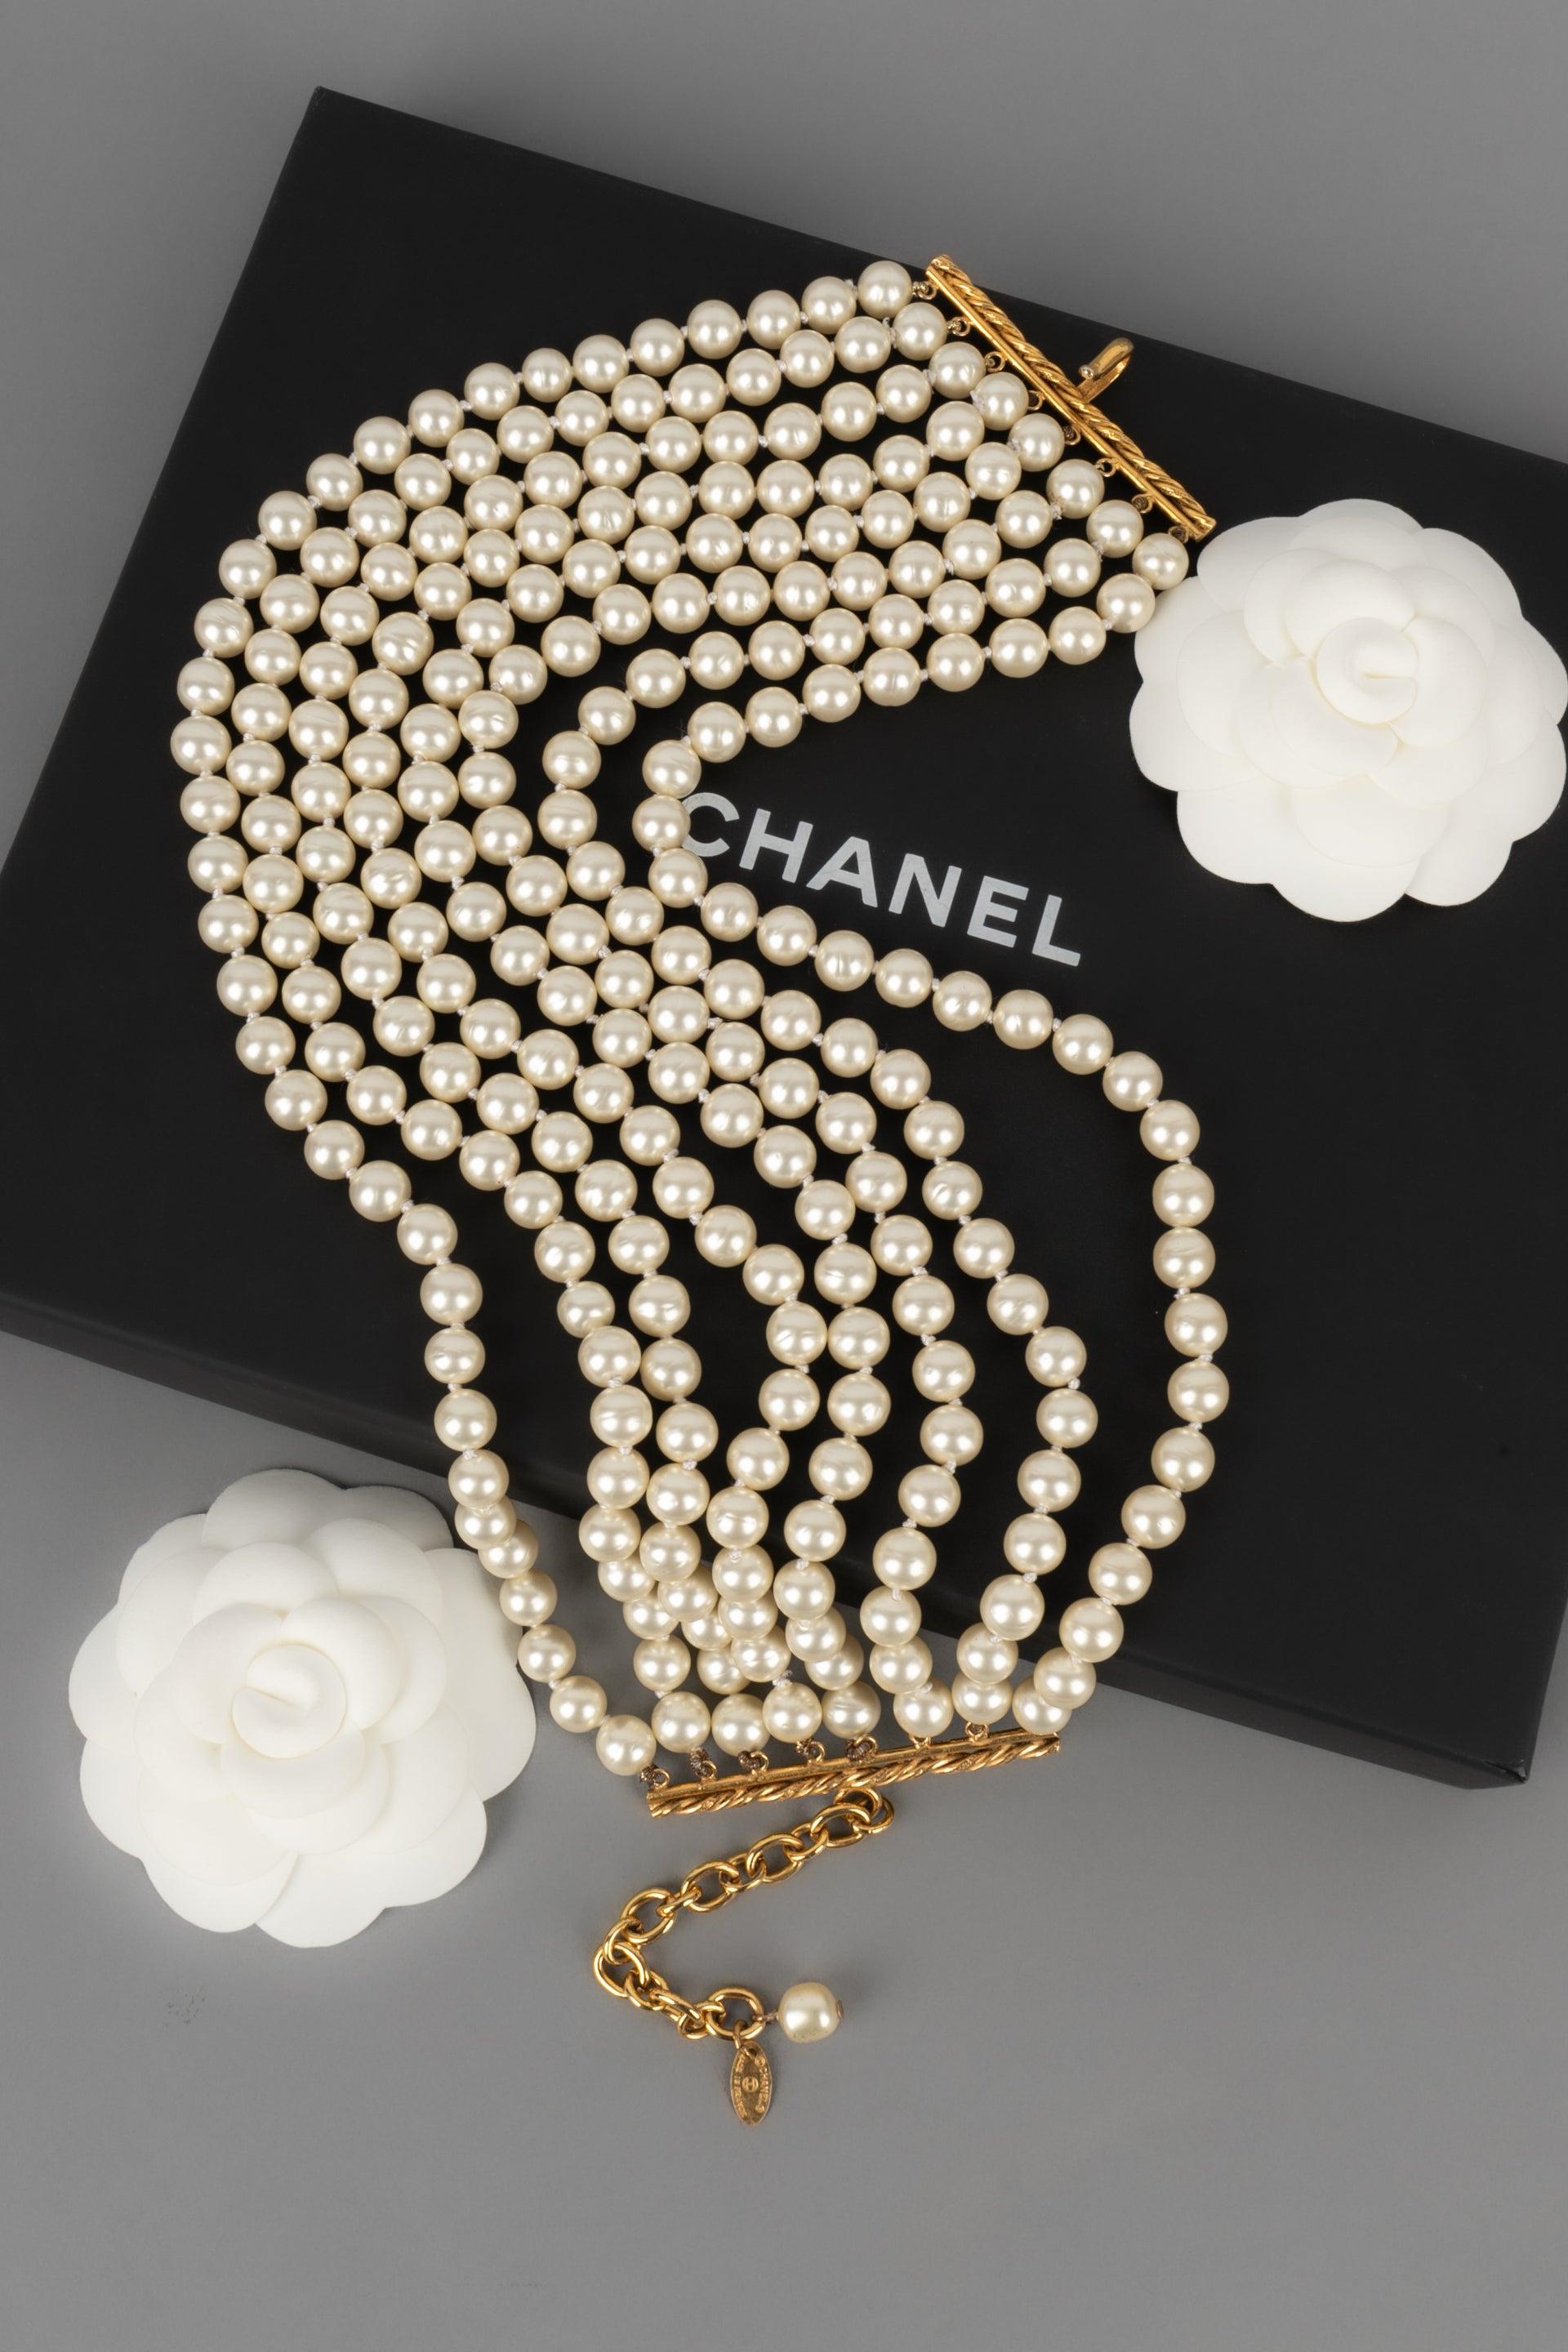 Chanel - (Made in France) Eight-row choker necklace with costume pearls. Jewelry from the 1980s.

Additional information:
Condition: Very good condition
Dimensions: Length: from 32 cm to 40 cm

Seller Reference: CB237